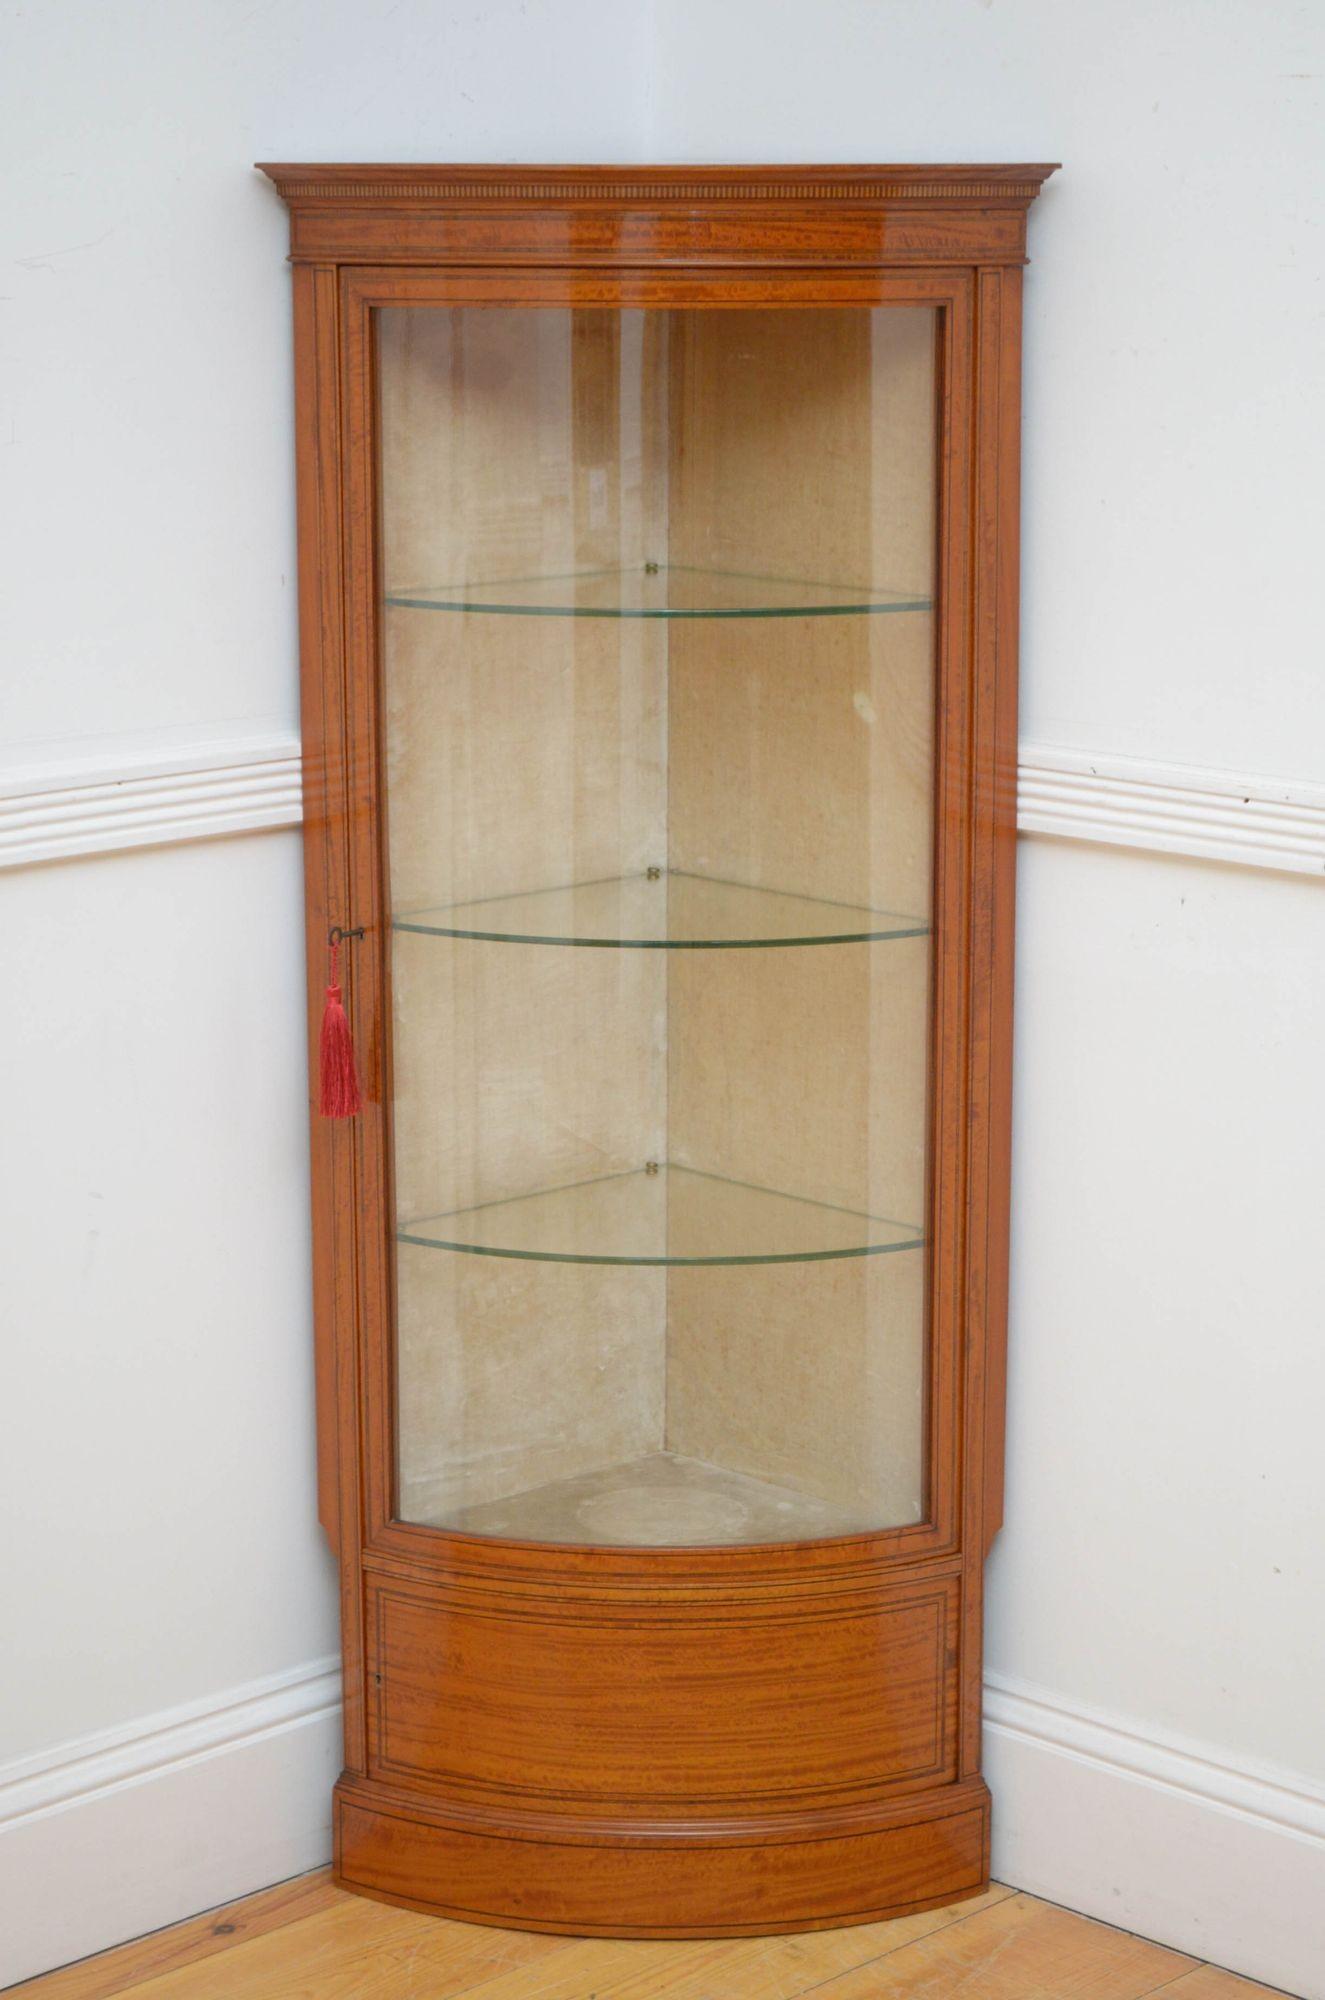 Sn5319 Stylish and very rare Edwardian satinwood corner display cabinet, having inlaid top above bow fronted door enclosing glass shelves and inlaid cupboard below, both fitted with original working locks and a key, standing on moulded plinth base.